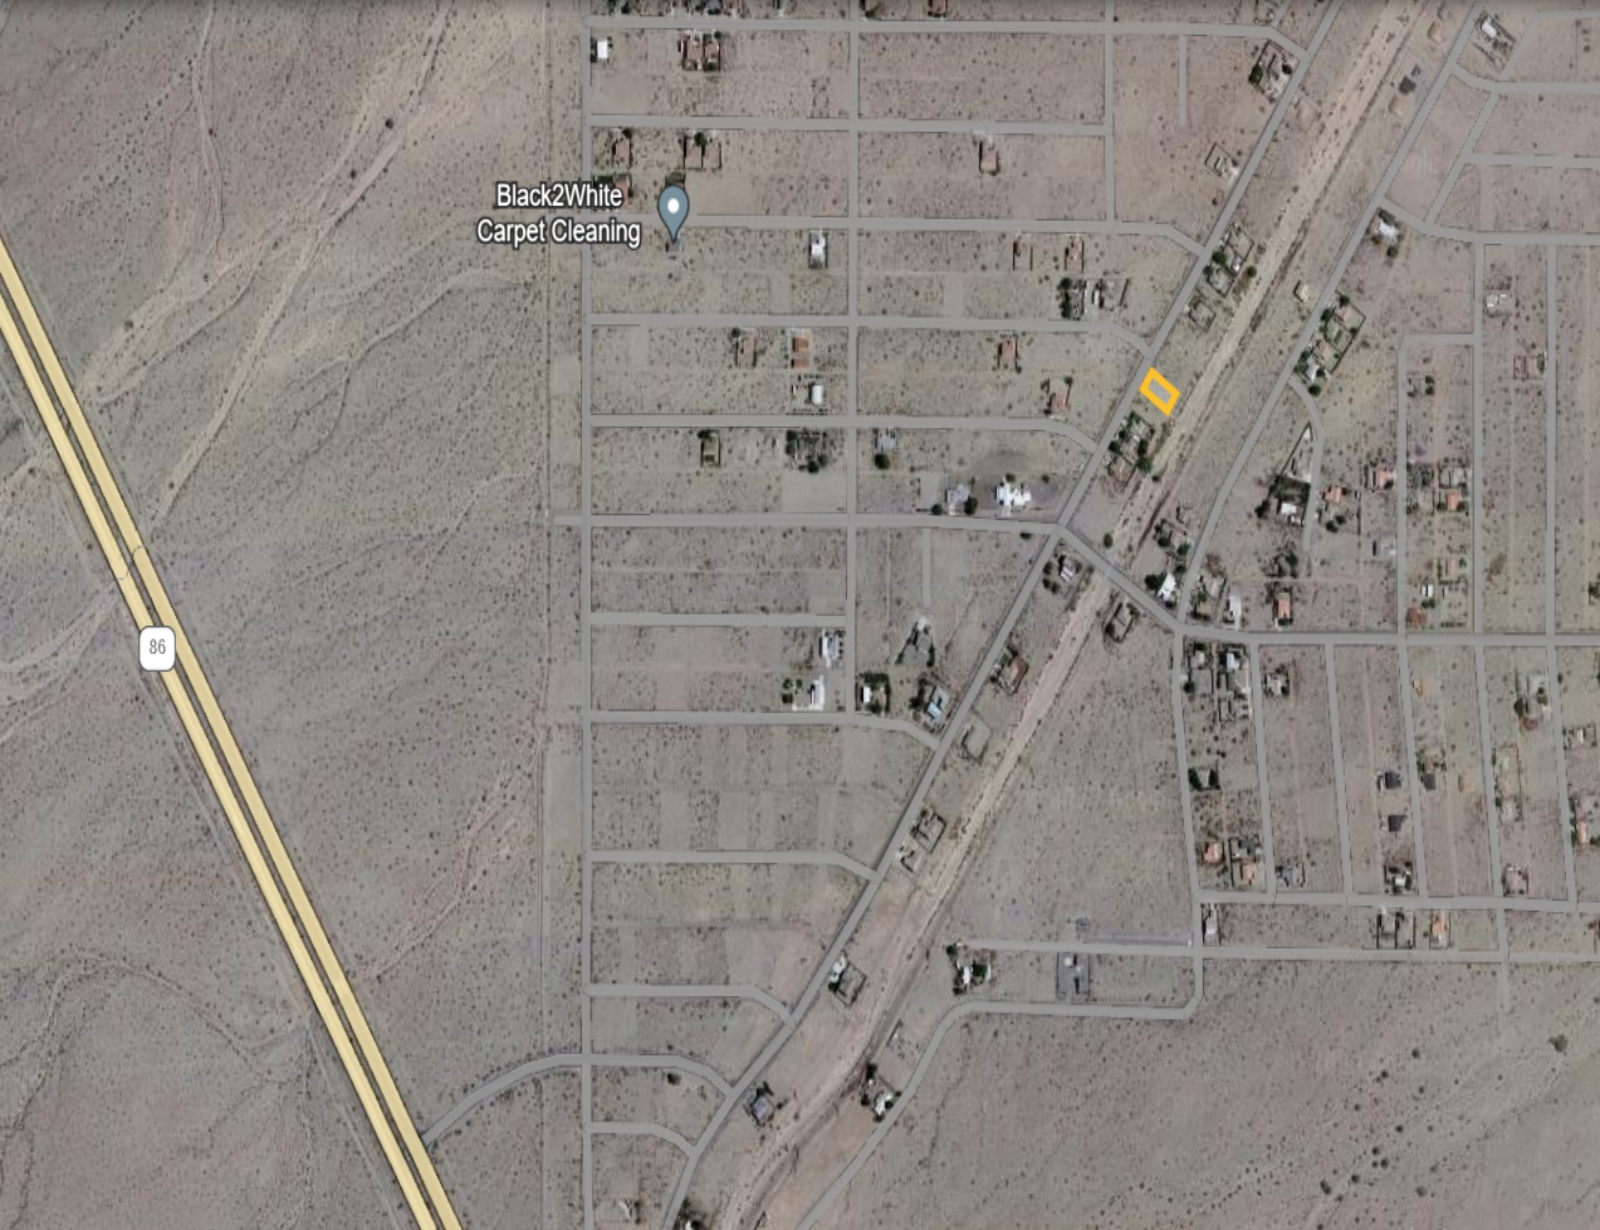 MAIN ROAD RESIDENTIAL LOT LOCATED NEAR THE FIRE STATION!! LOW MONTHLY PAYMENTS OF $300.00  2832 Treadwell Blvd., Salton City, CA 92275 APN: 007-510-009-000 - Get Land Today